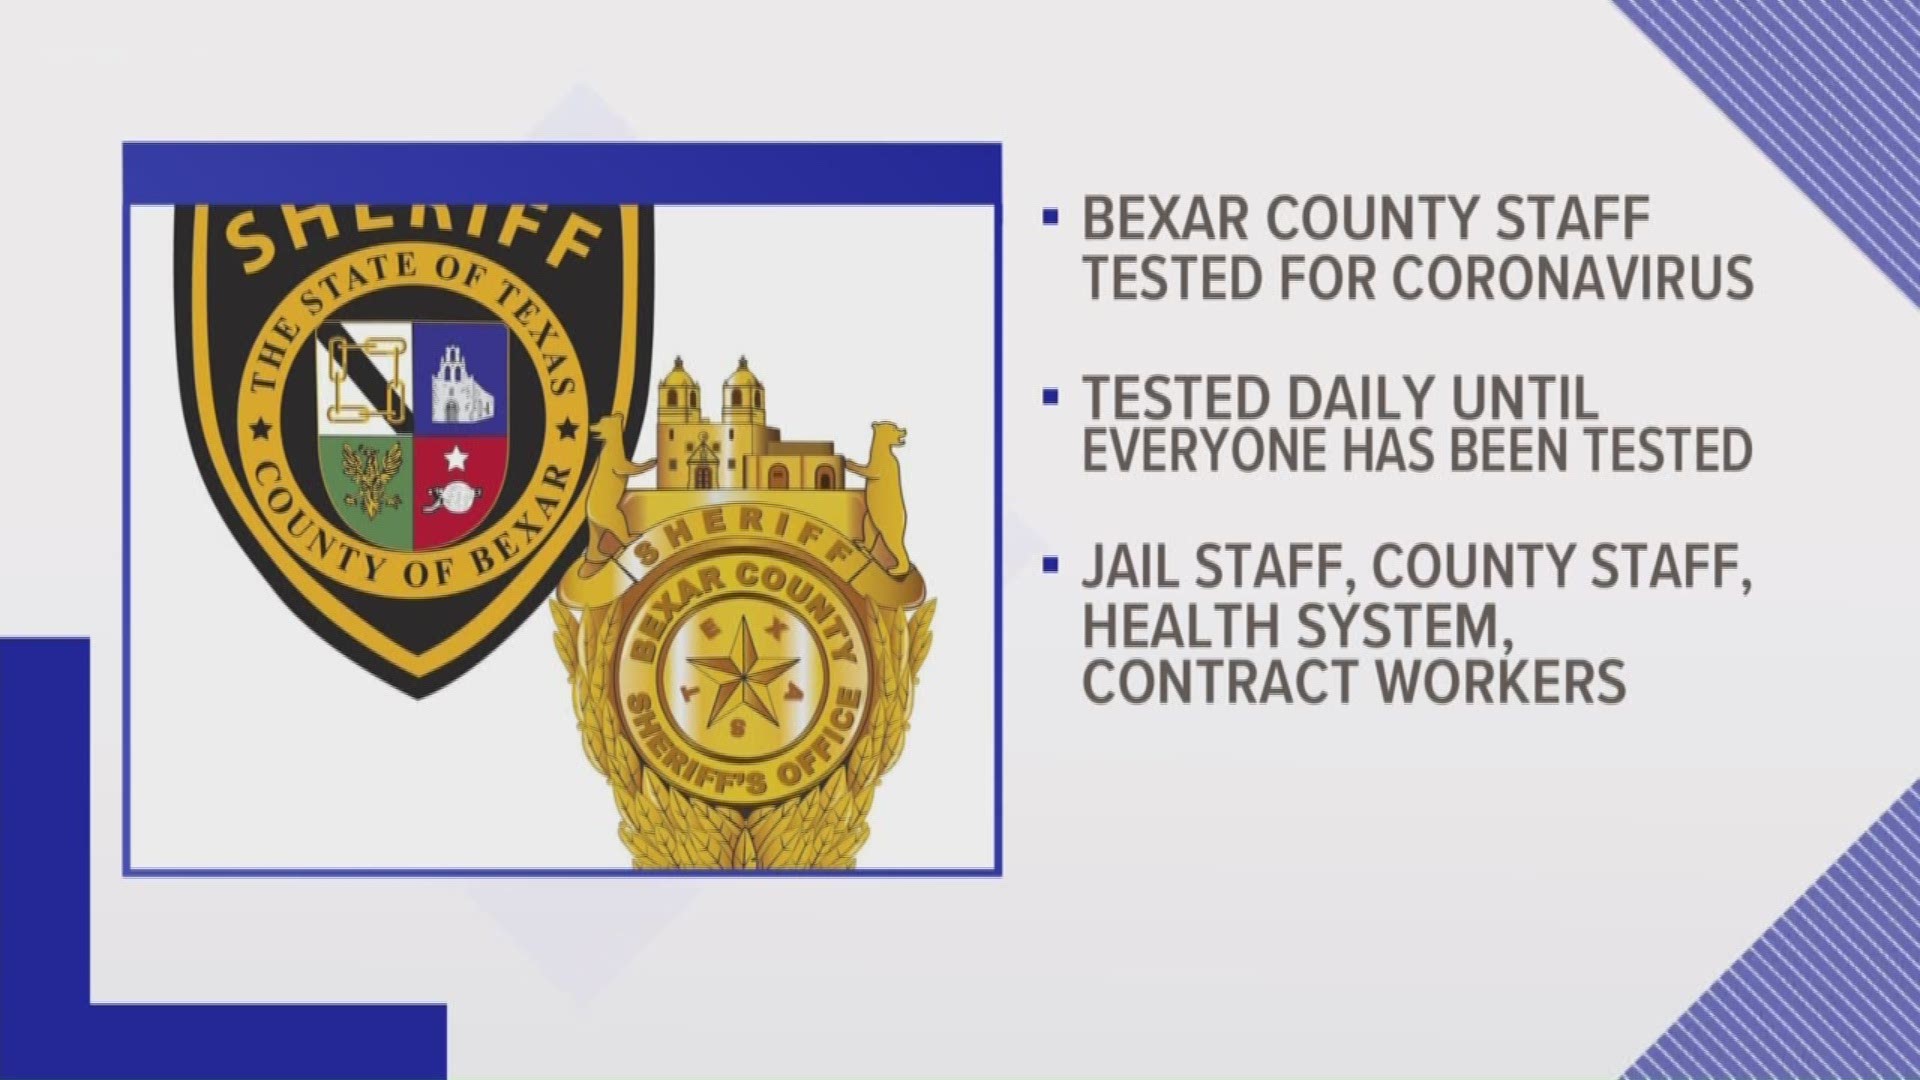 The announcement comes as nearly 60 inmates have tested positive for the coronavirus.